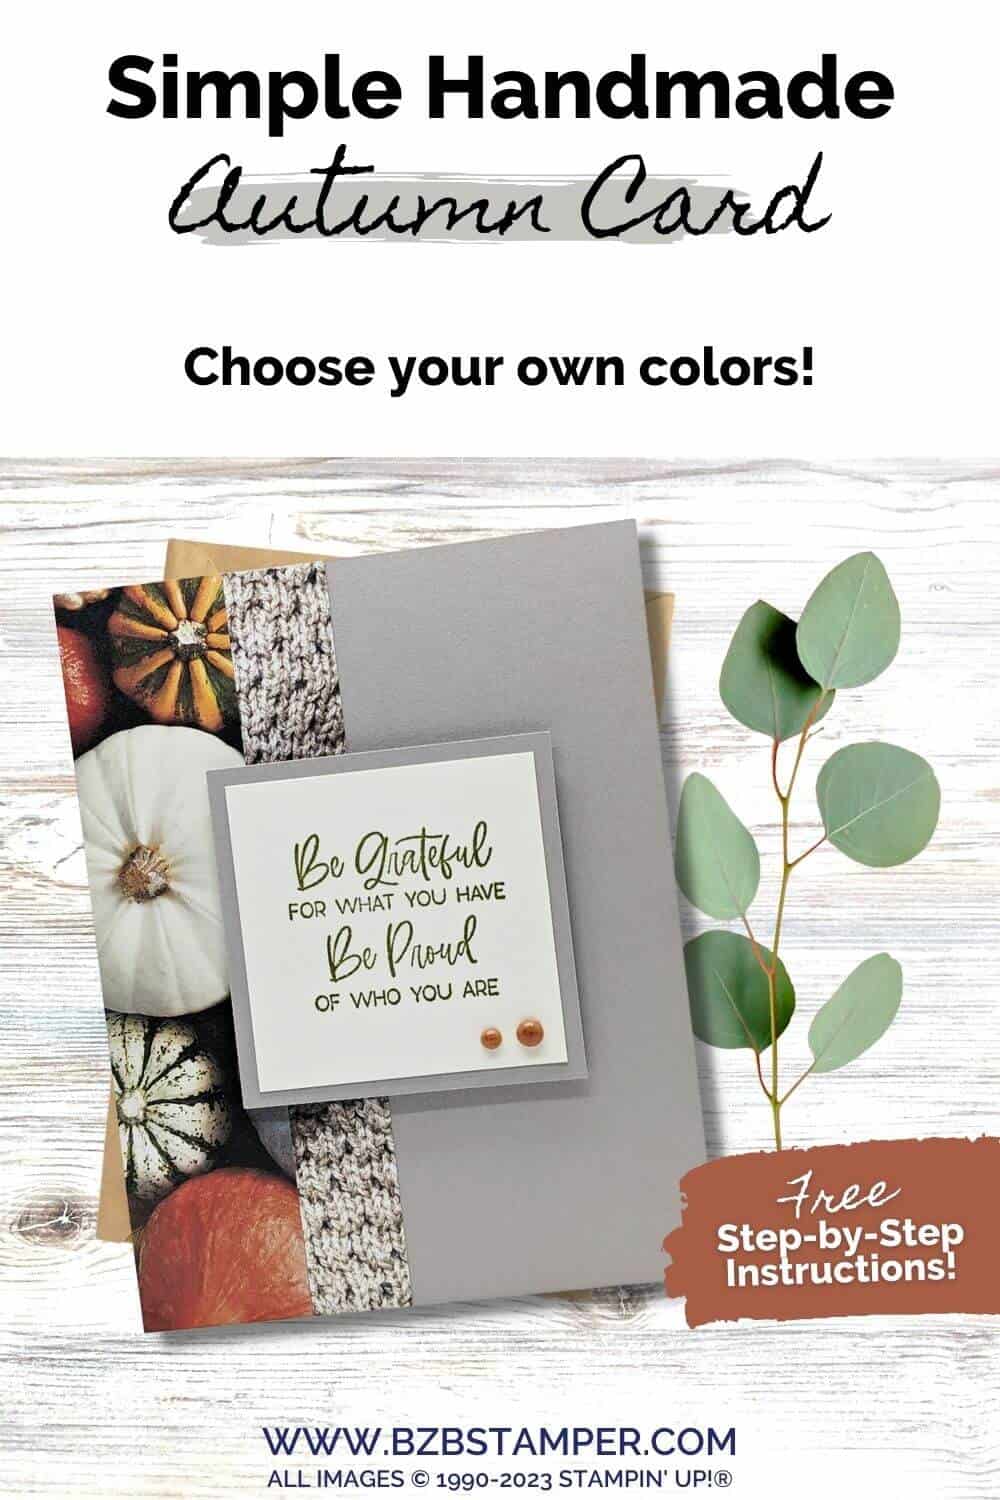 The So Sincere Stamp Set By Stampin' Up! | Barb Brimhall, The BZBStamper